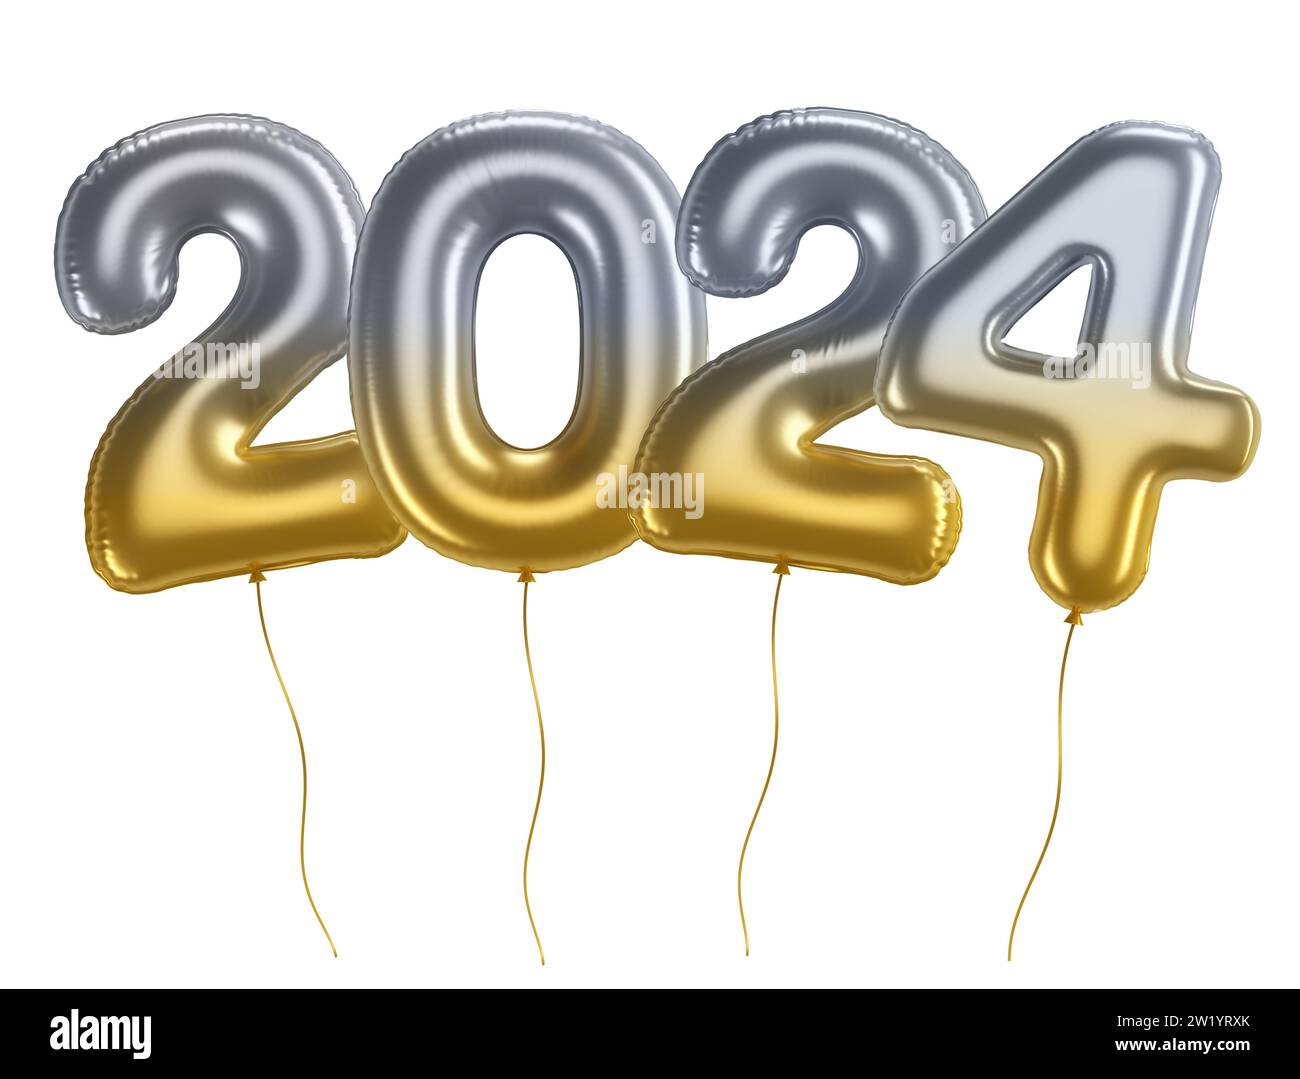 Holiday background happy new year 2024. Year numbers 2024 Golden and Silver balloon on white background with clipping path. Celebrating the New Year's Stock Photo